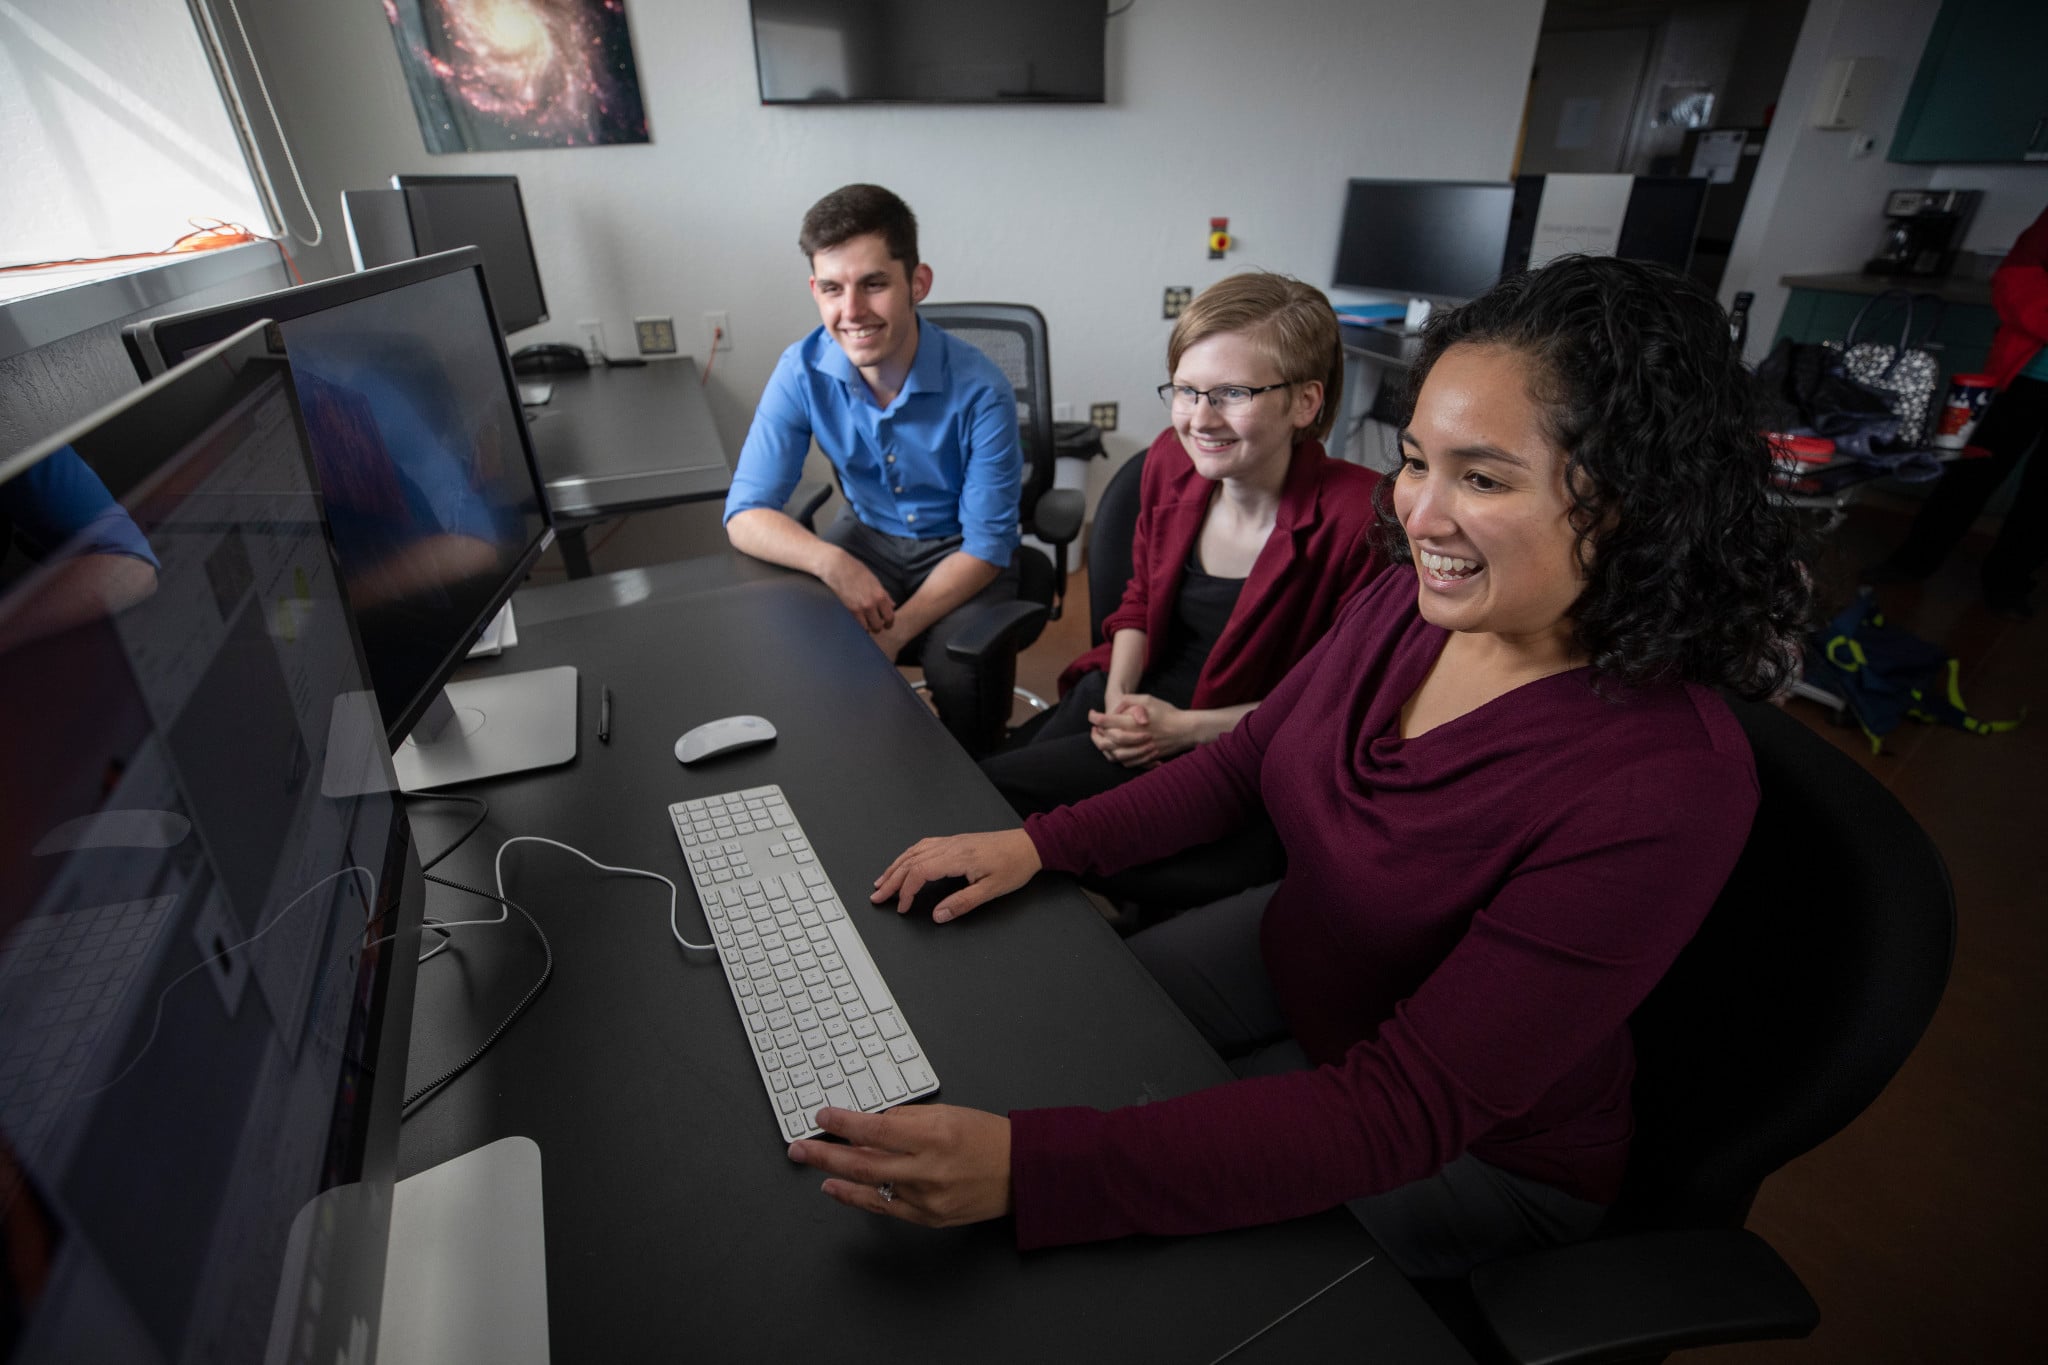 Three students sitting in front of several computer screens